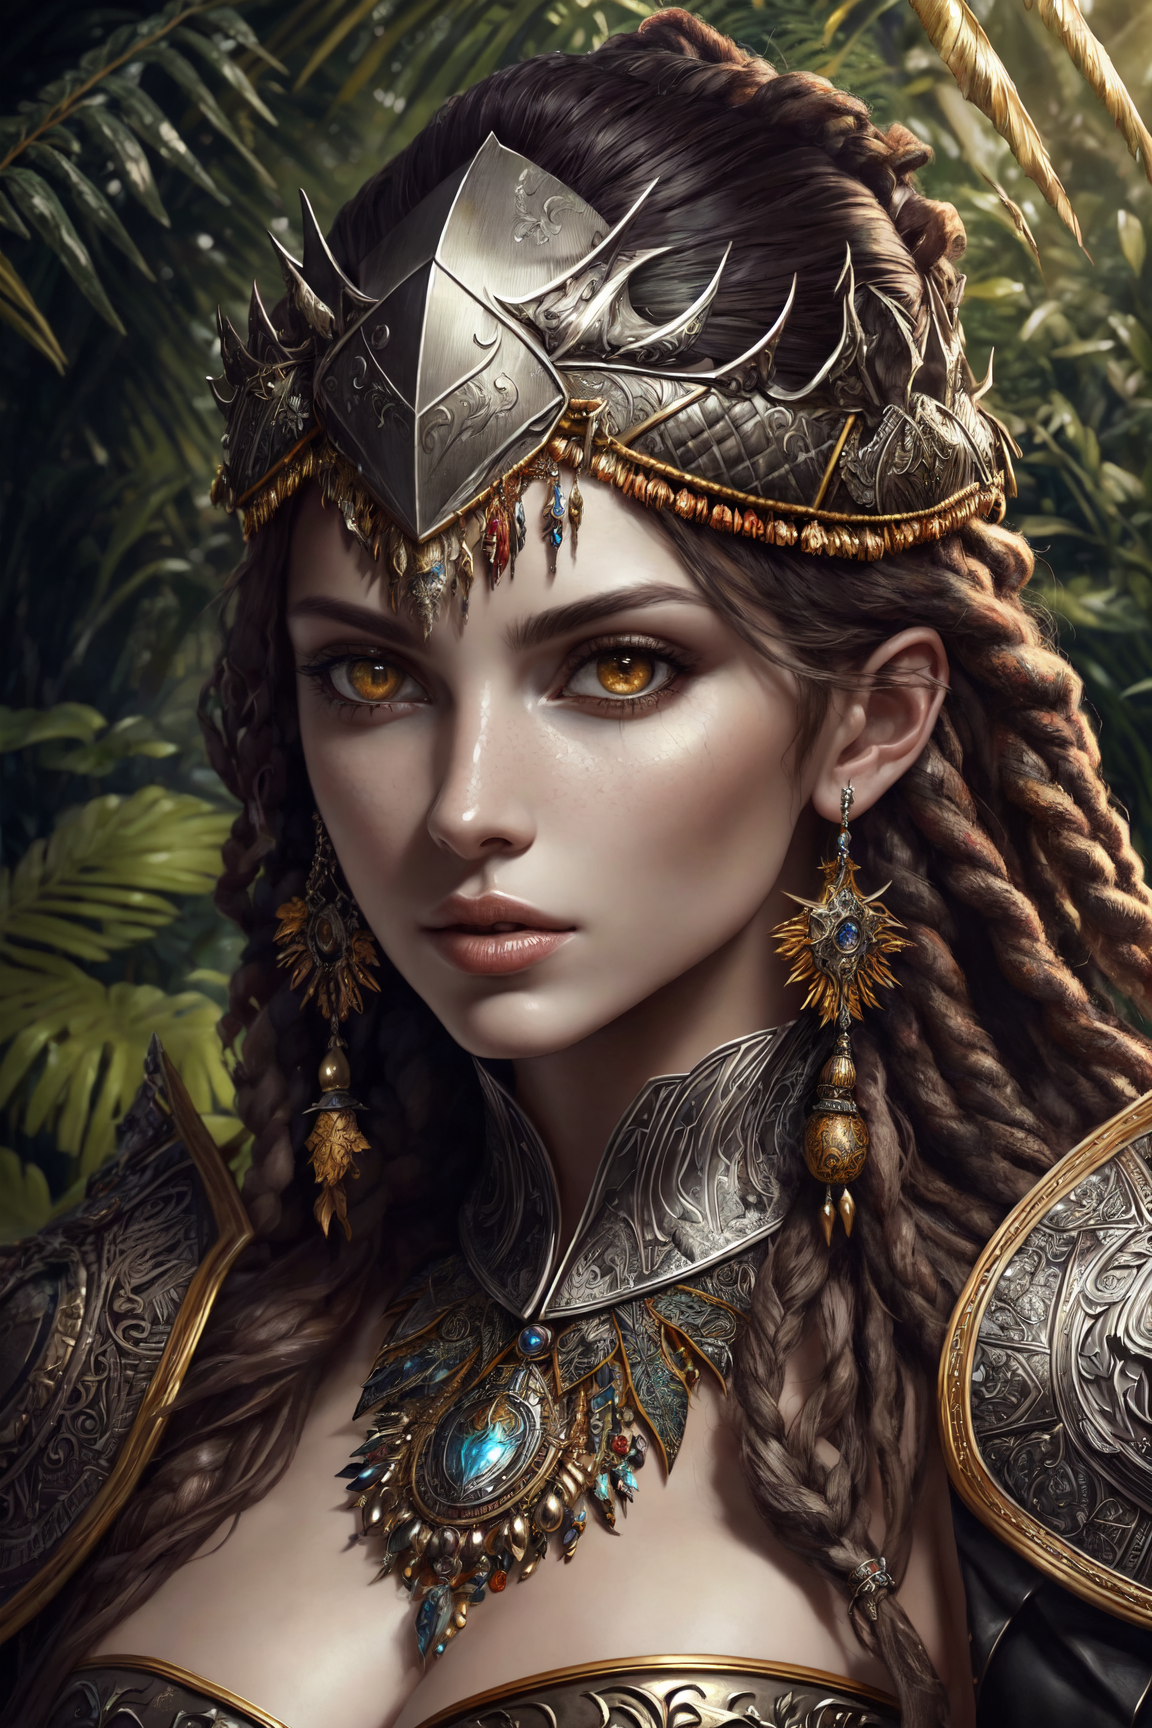 A fantasy illustration of a beautiful woman with long hair, wearing a gold crown and ornamental earrings.